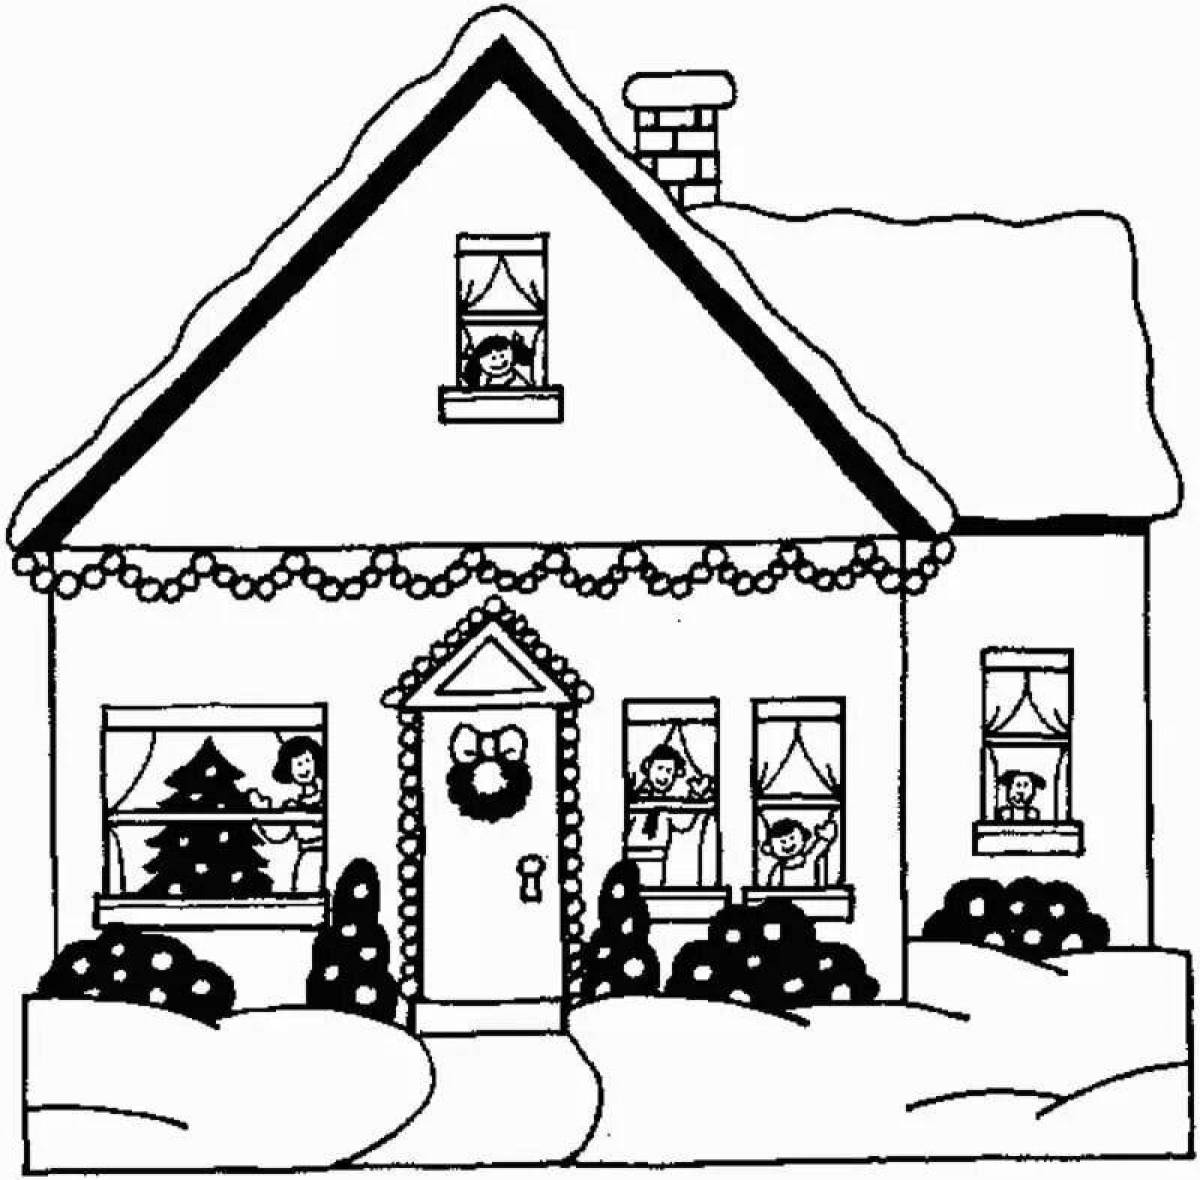 Rampant dream house coloring page